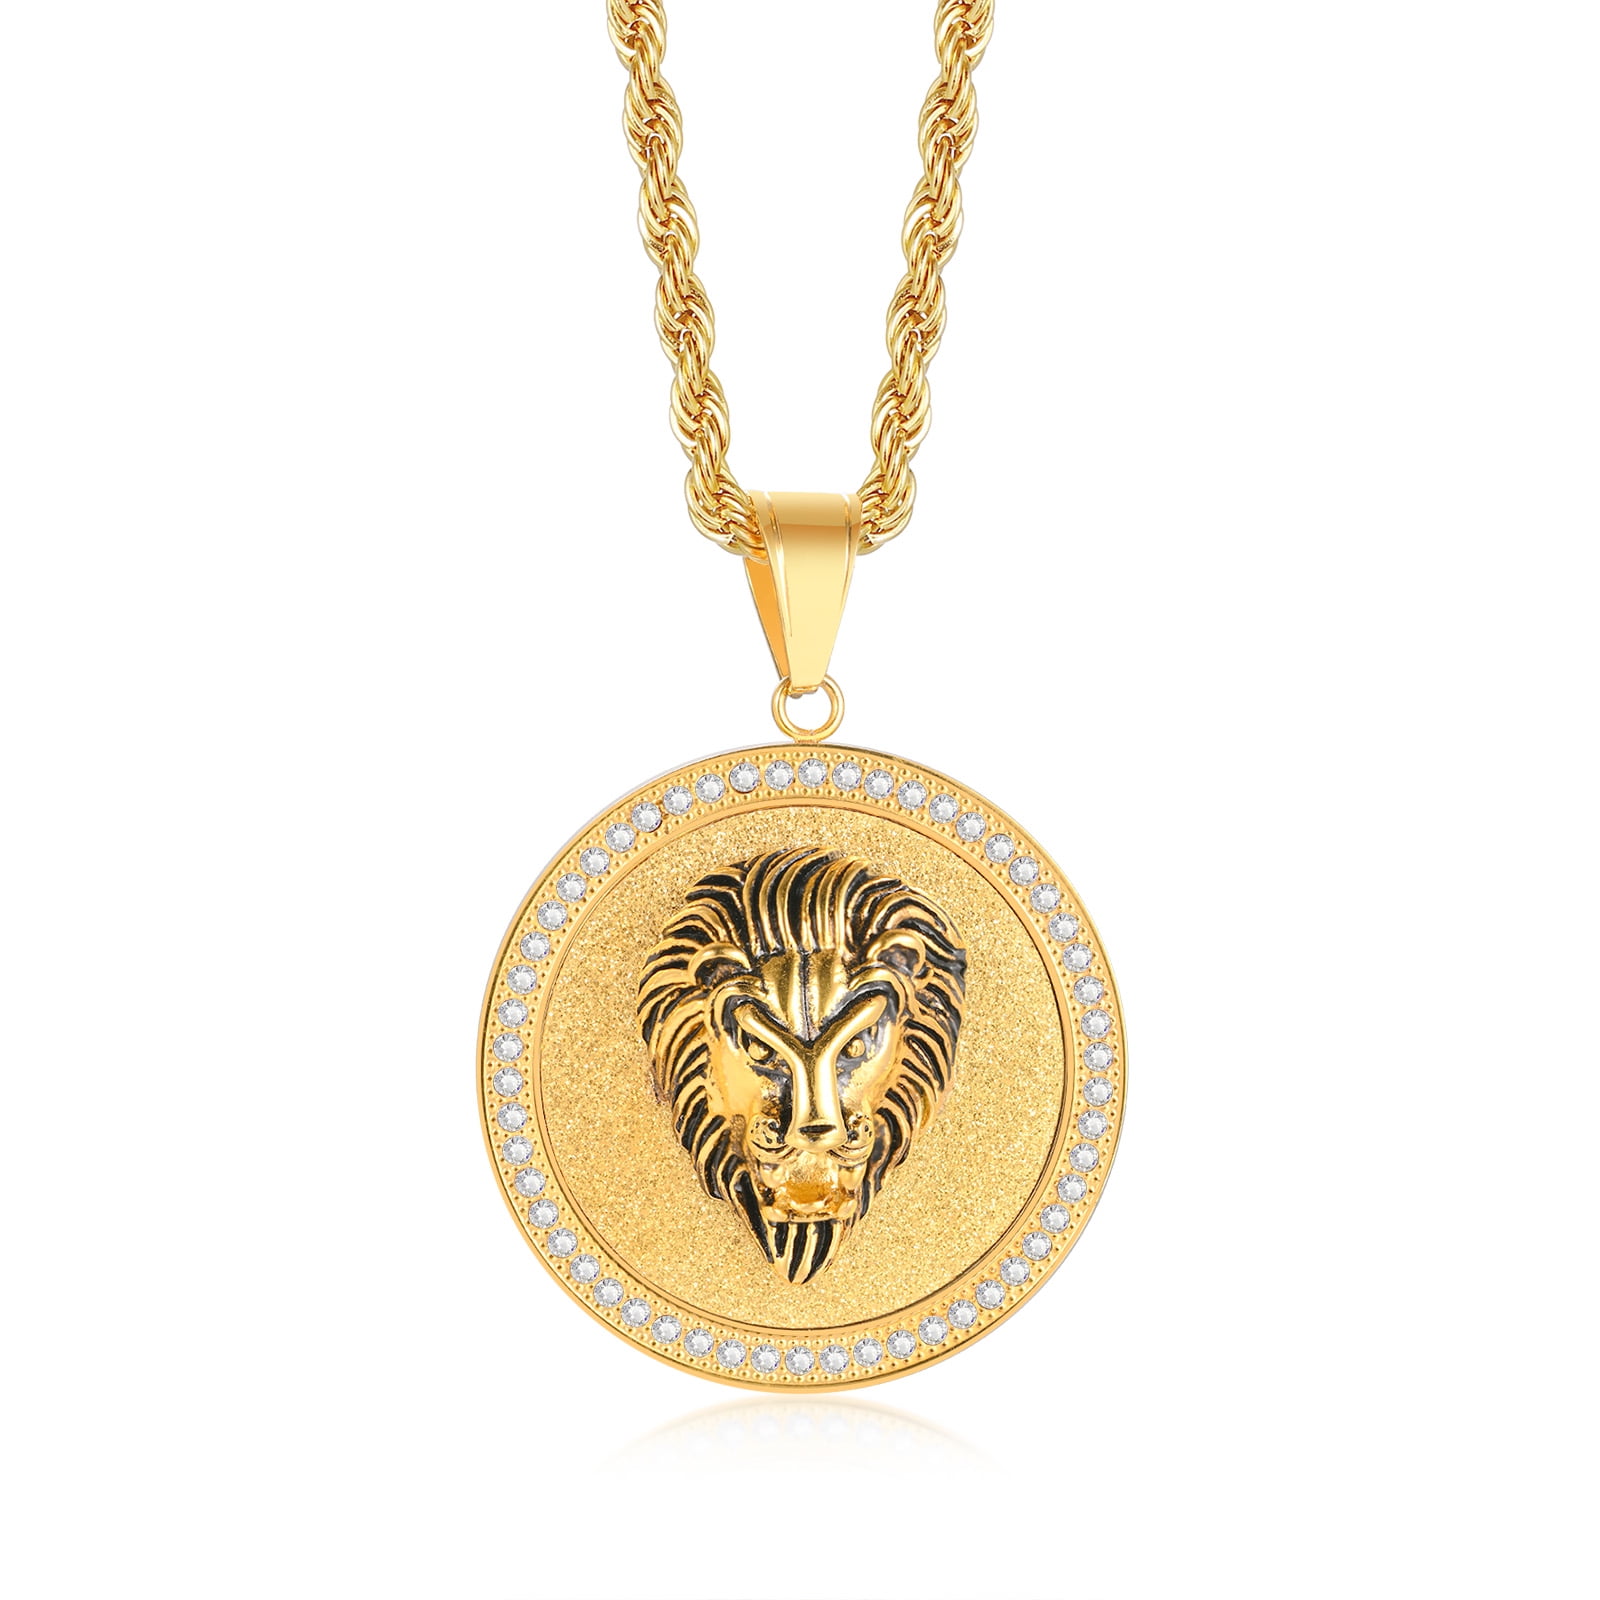 18k Gold Plated Hip Hop Jewelry Stainless Steel Iced Out Lion Head Pendant Necklace for Men,24 Chain Necklace Punk Jewelry